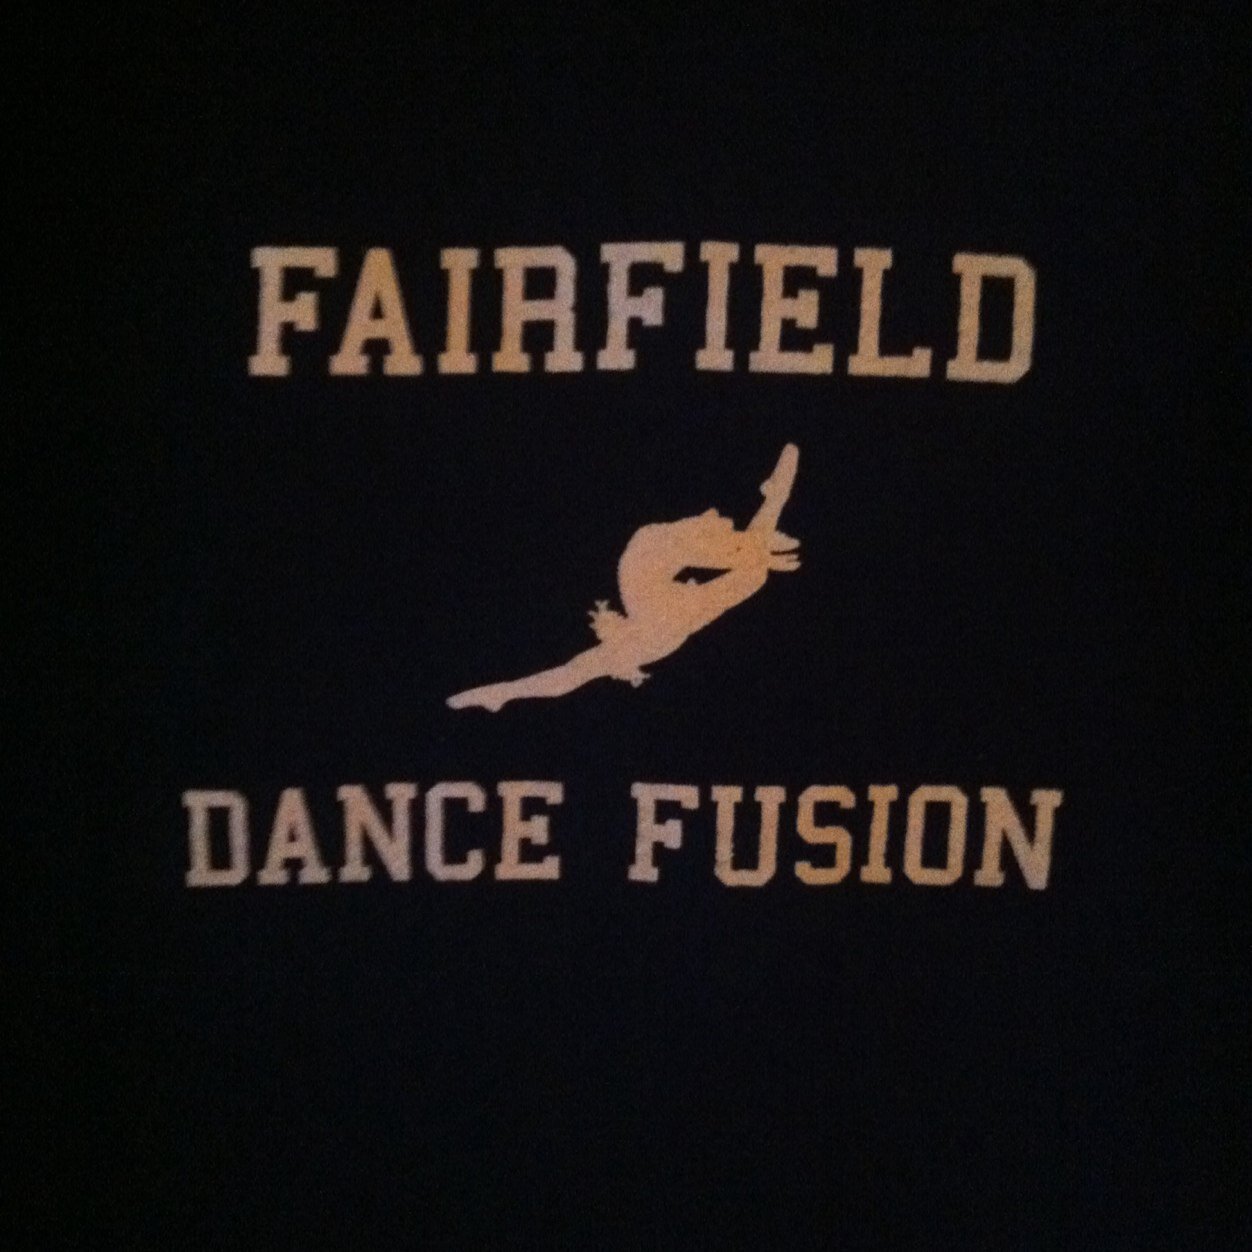 Follow Fairfield's newest competitive dance club on Twitter and Instagram (@fairfielddancefusion) for updates and pictures/videos of our progress!